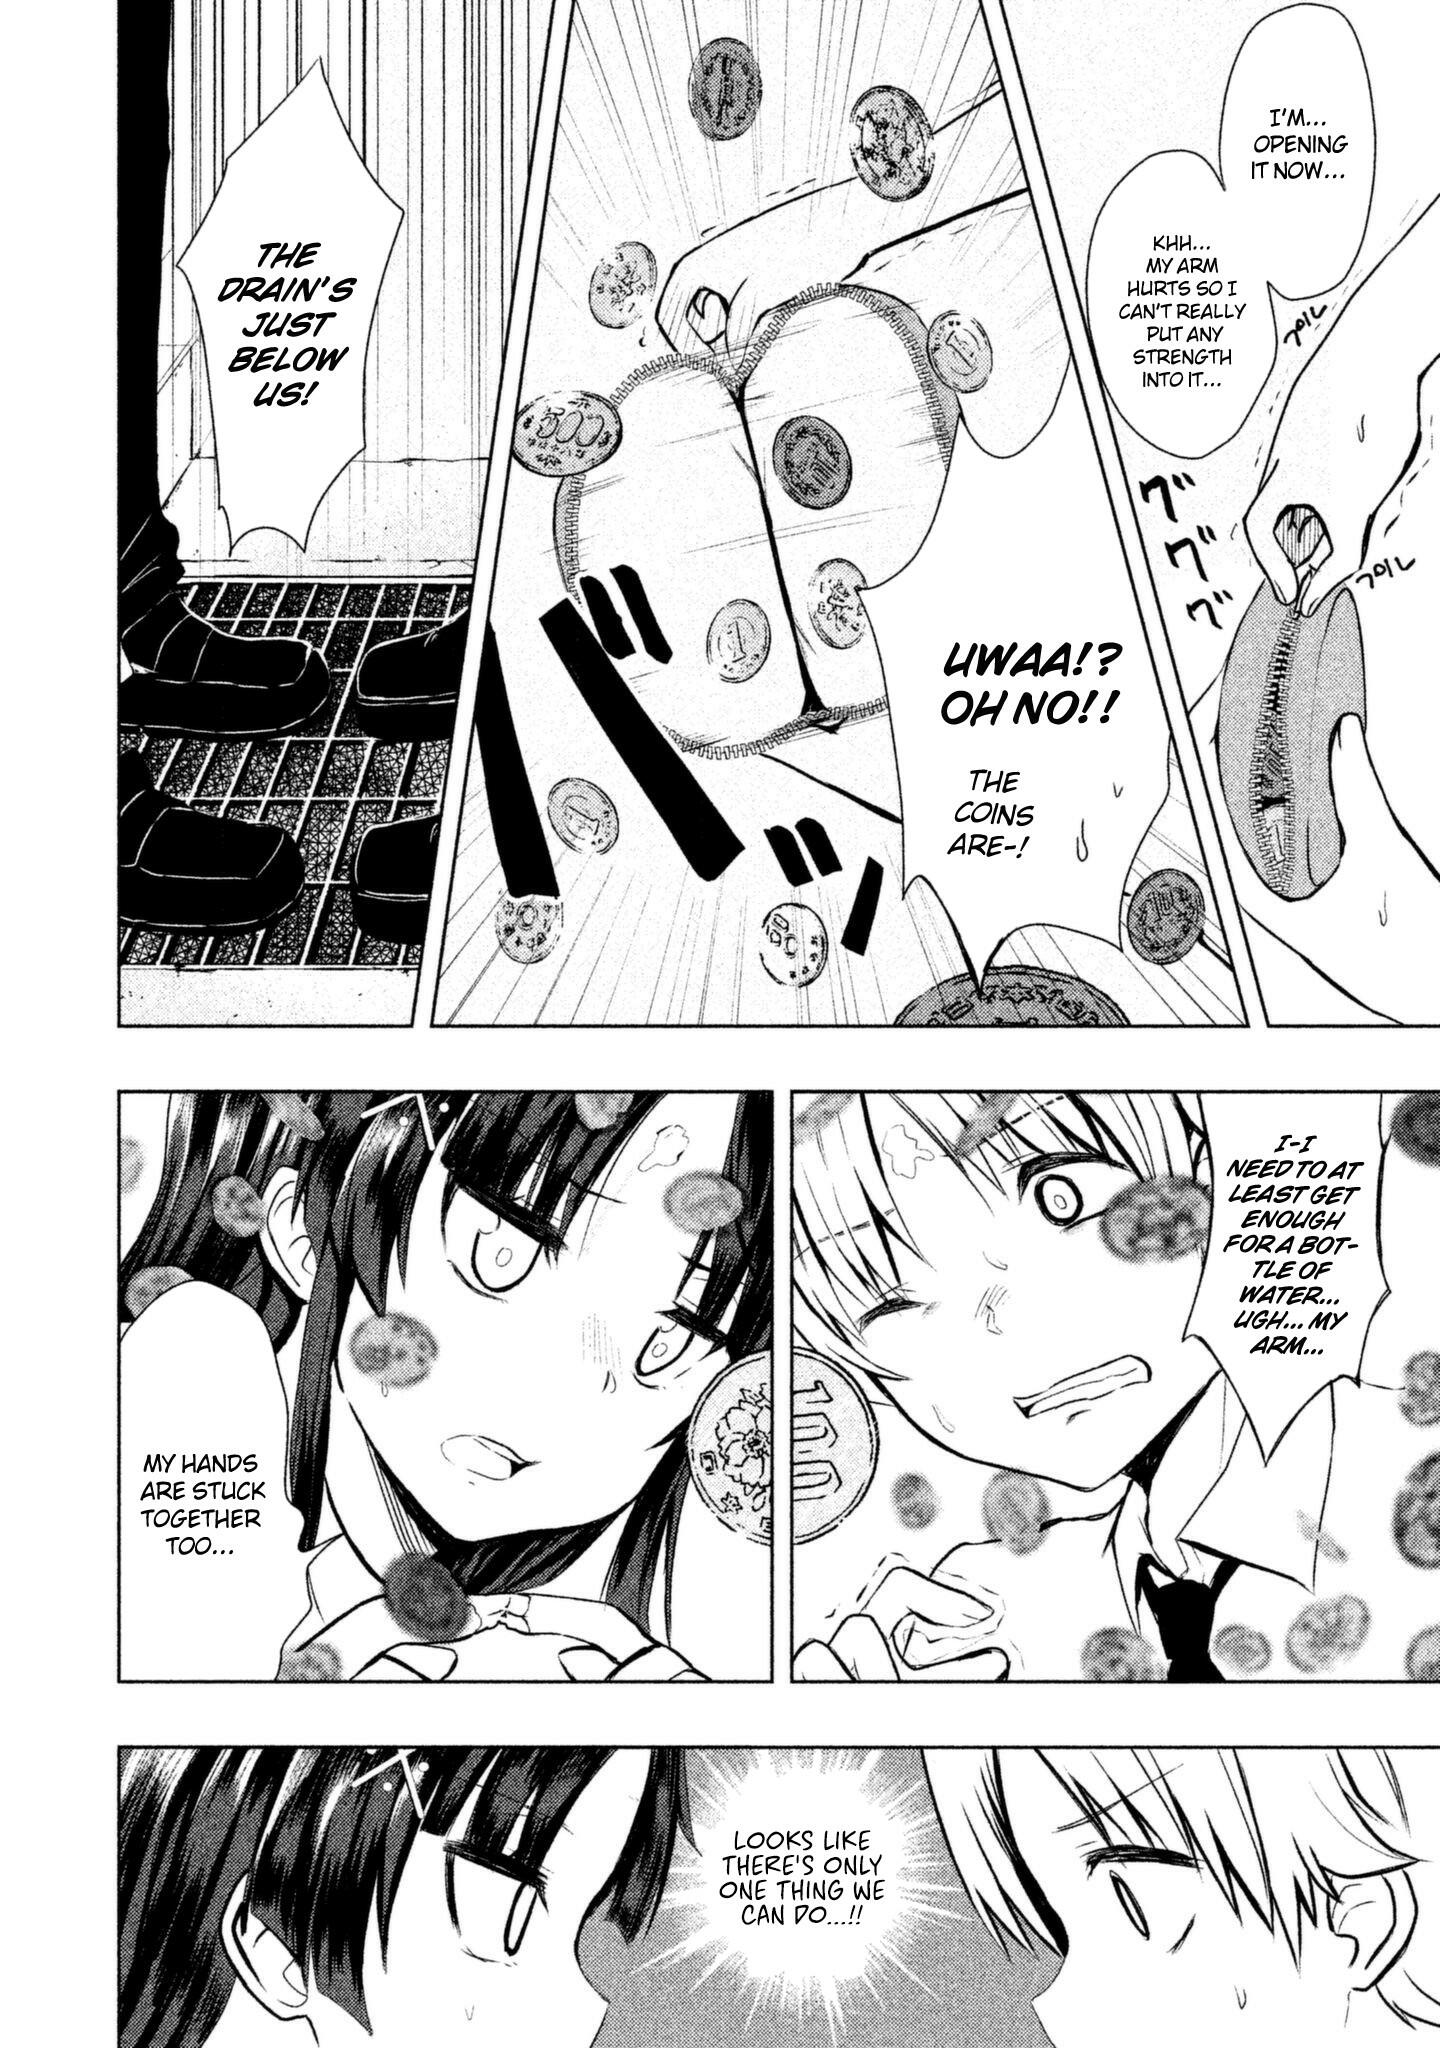 A Girl Who Is Very Well-Informed About Weird Knowledge, Takayukashiki Souko-San Chapter 16: Adhesive page 7 - Mangakakalots.com